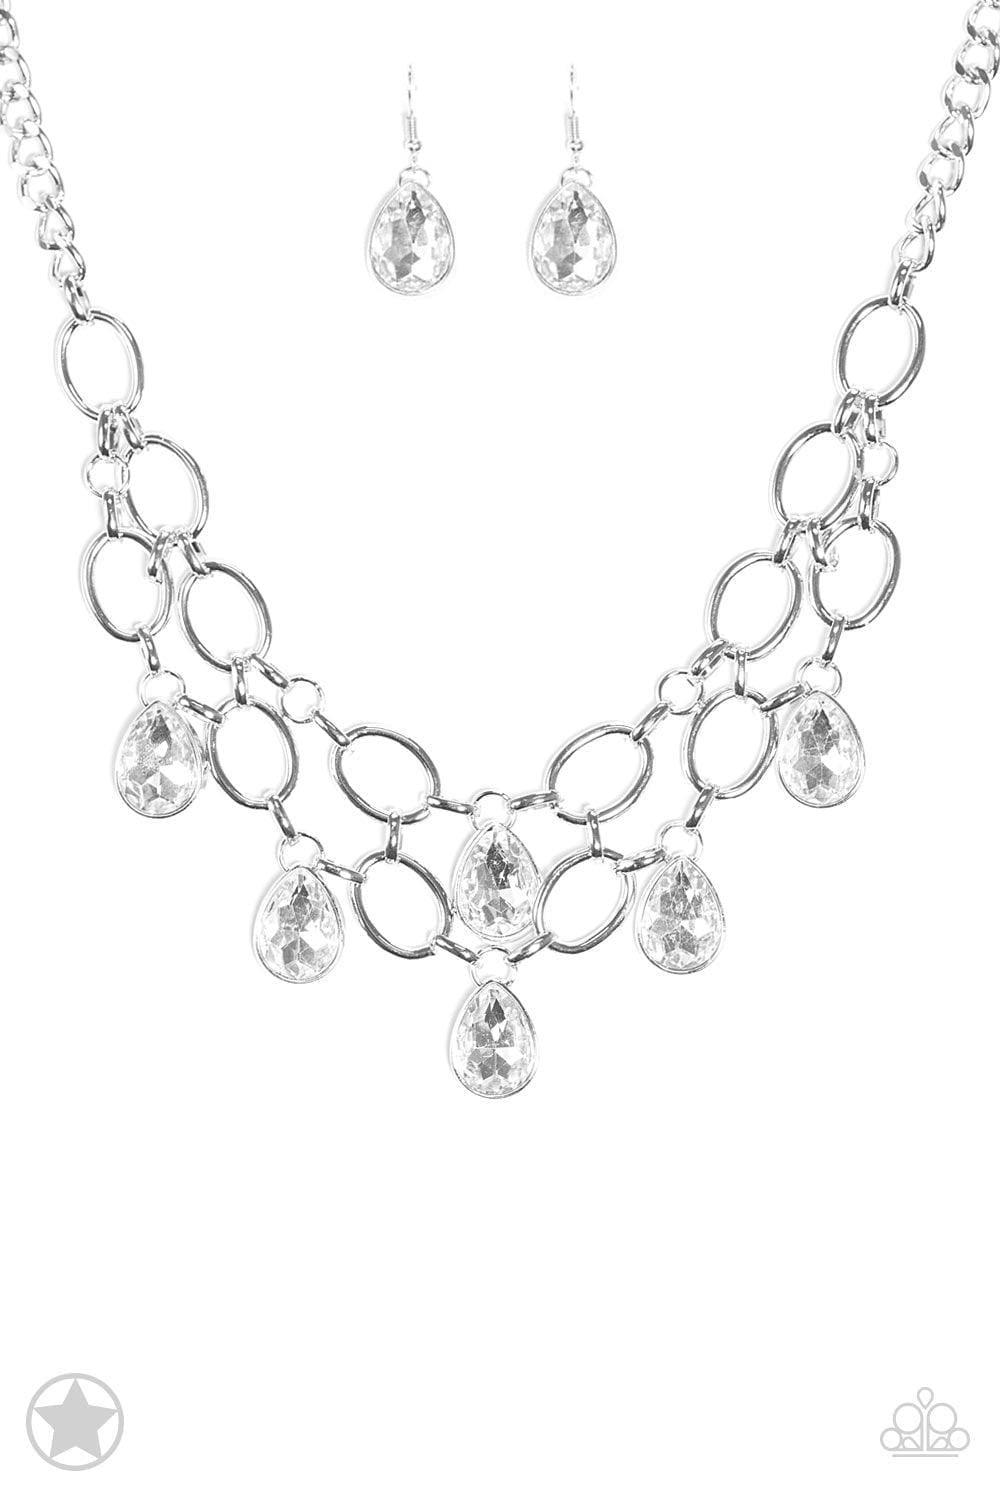 Paparazzi Accessories - Paparazzi Blockbuster Necklace: Show-stopping Shimmer White - Bling by JessieK